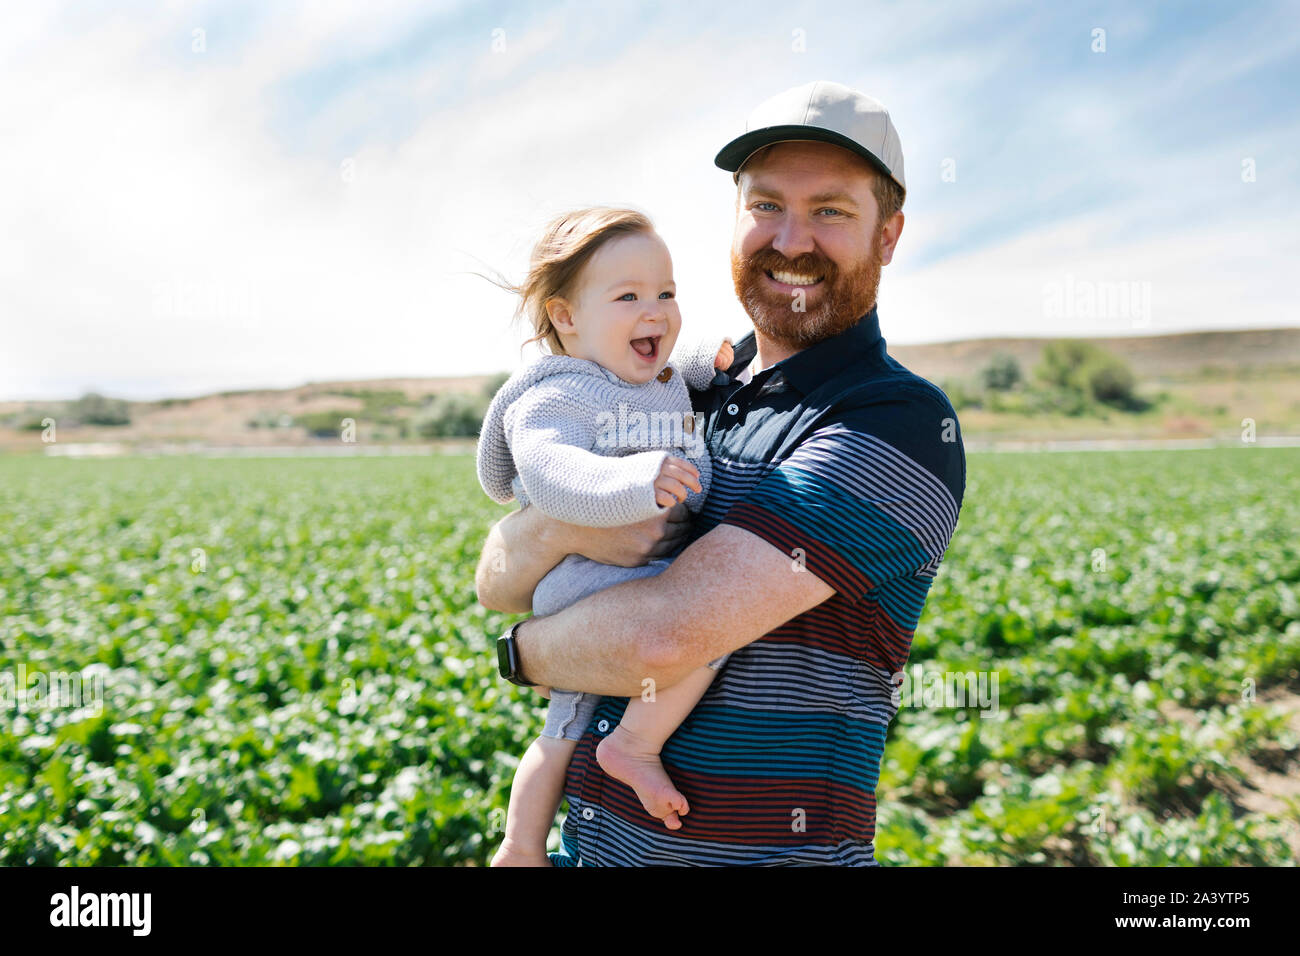 Smiling father holding baby girl in crop field Stock Photo